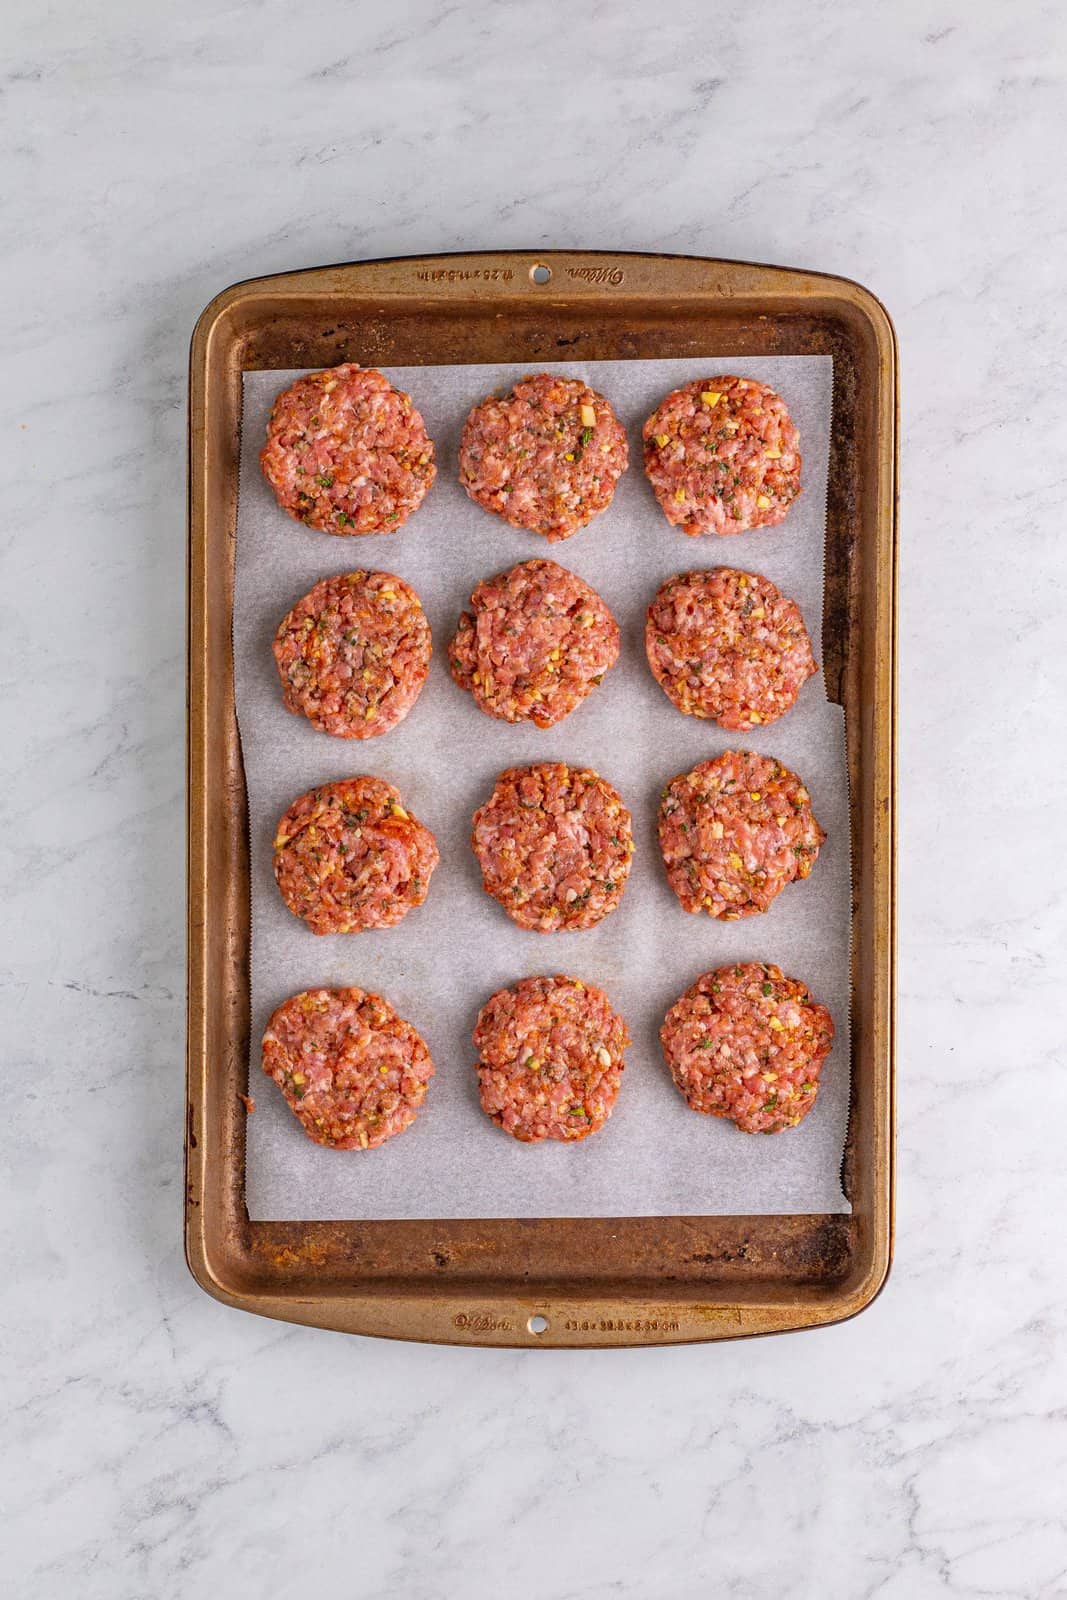 Sausage patties on parchment lined baking sheet.